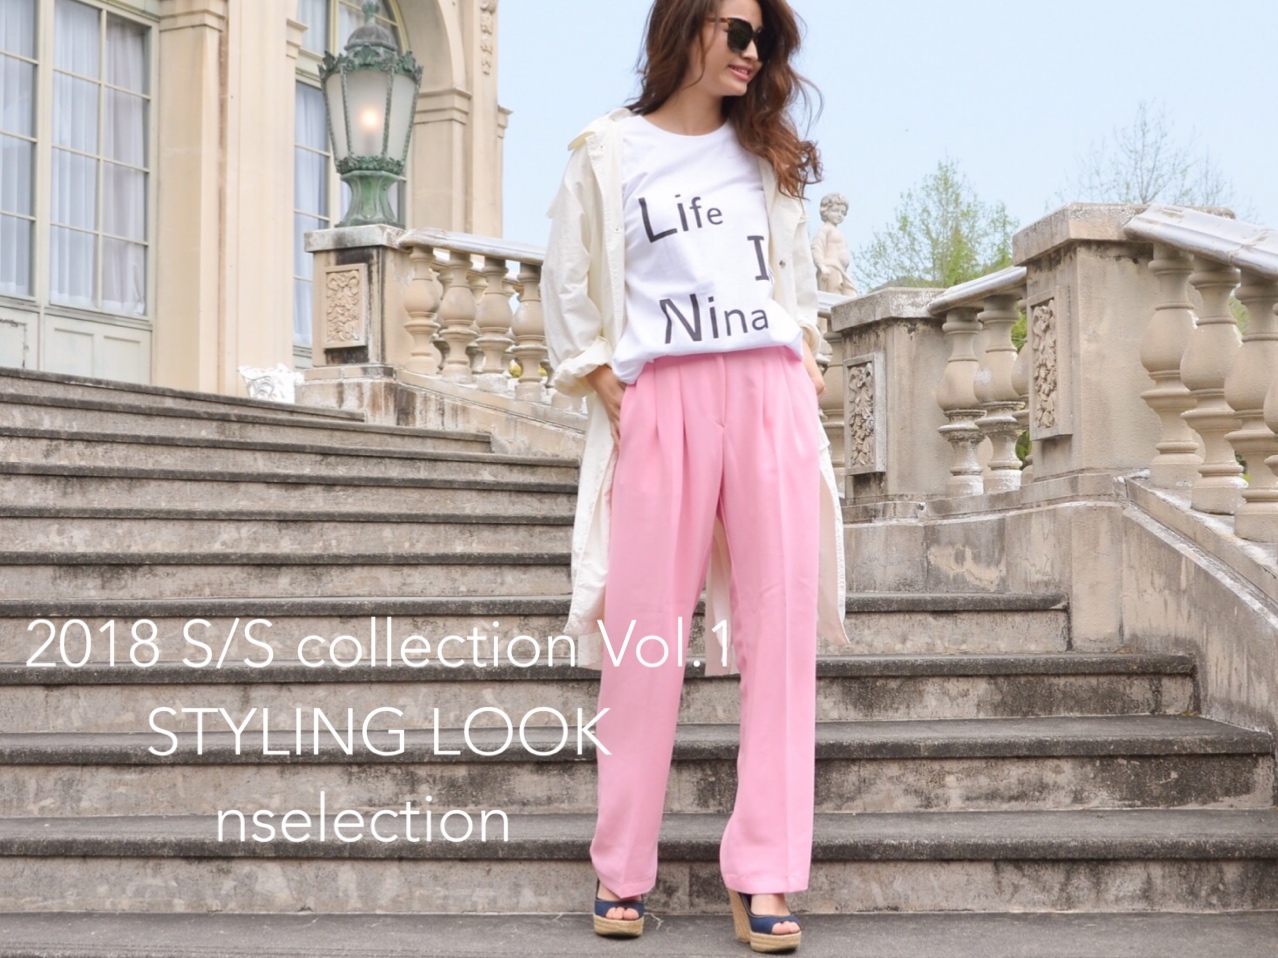 spring/summer collection Vol.1 styling look